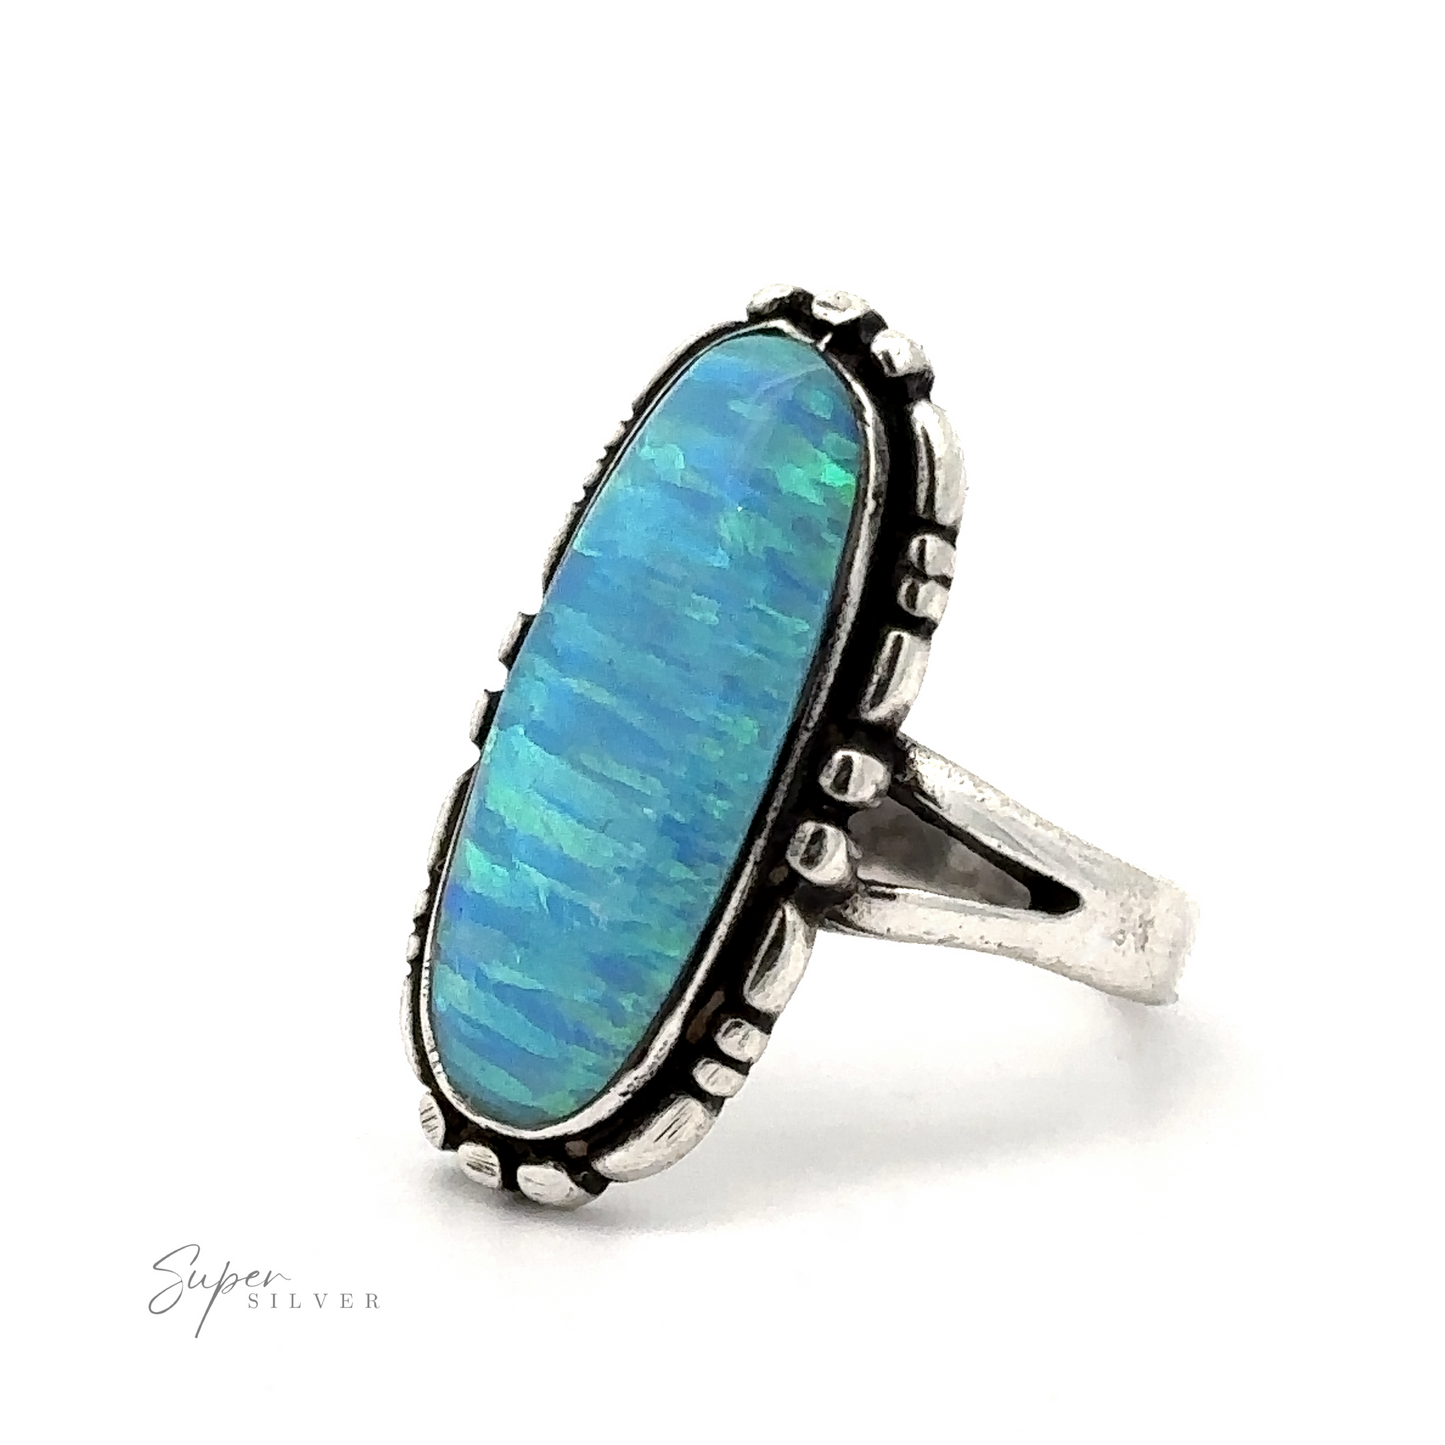 
                  
                    An American Made Oval Opal Ring with a Southwestern-styled sterling silver design features an elongated, oval-shaped lab created blue opal gemstone. The band has a split shank design. The background is white.
                  
                